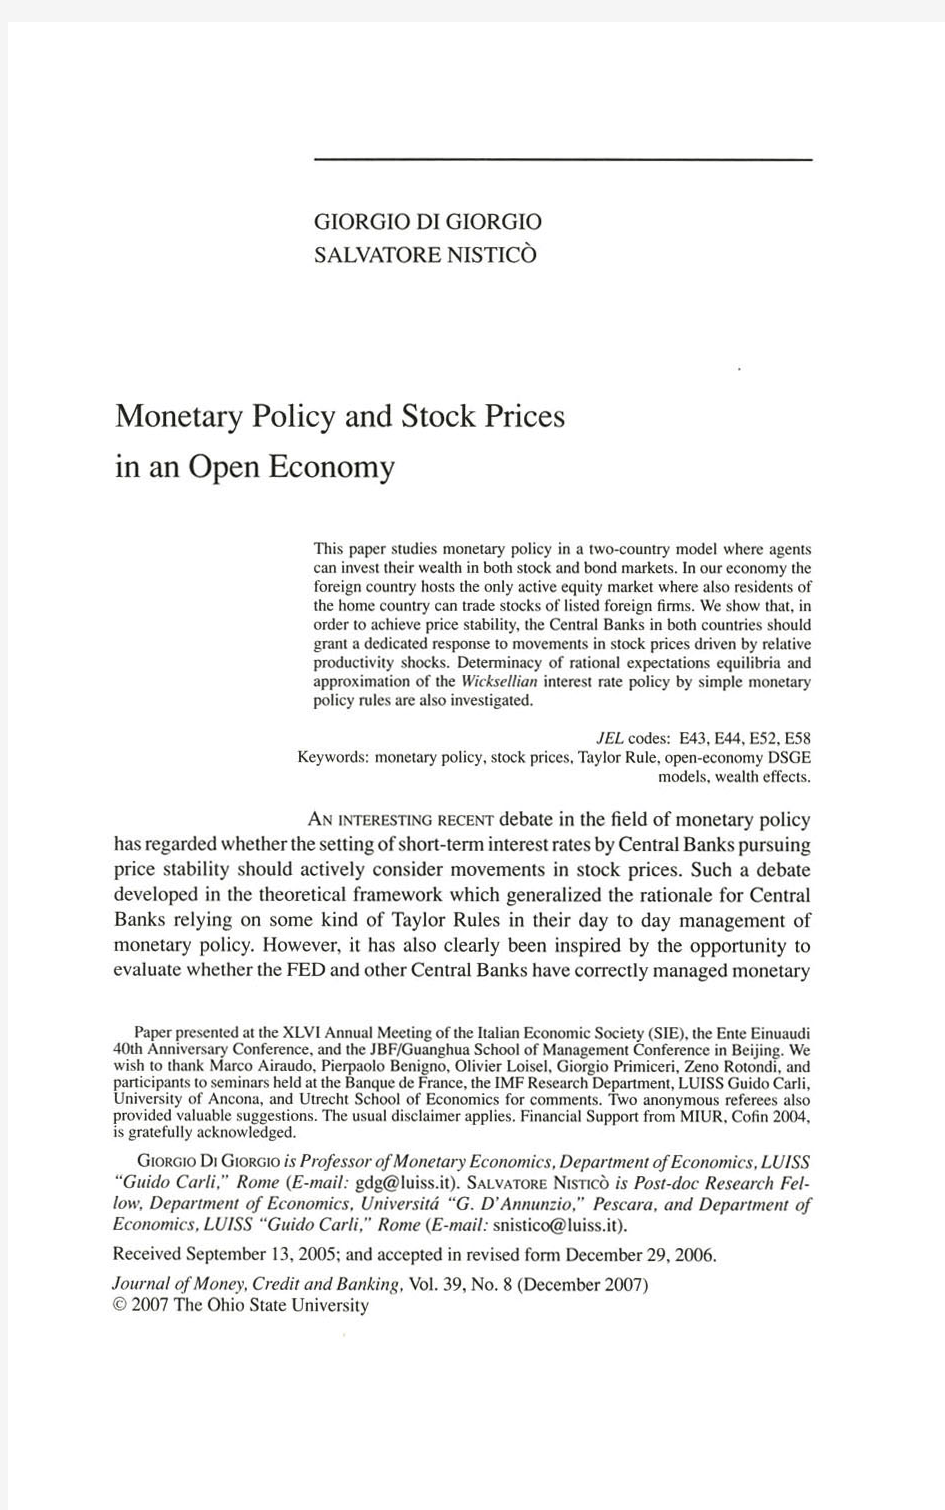 Monetary Policy and Stock Prices in an Open Economy 在开放经济中的货币政策和股票价格